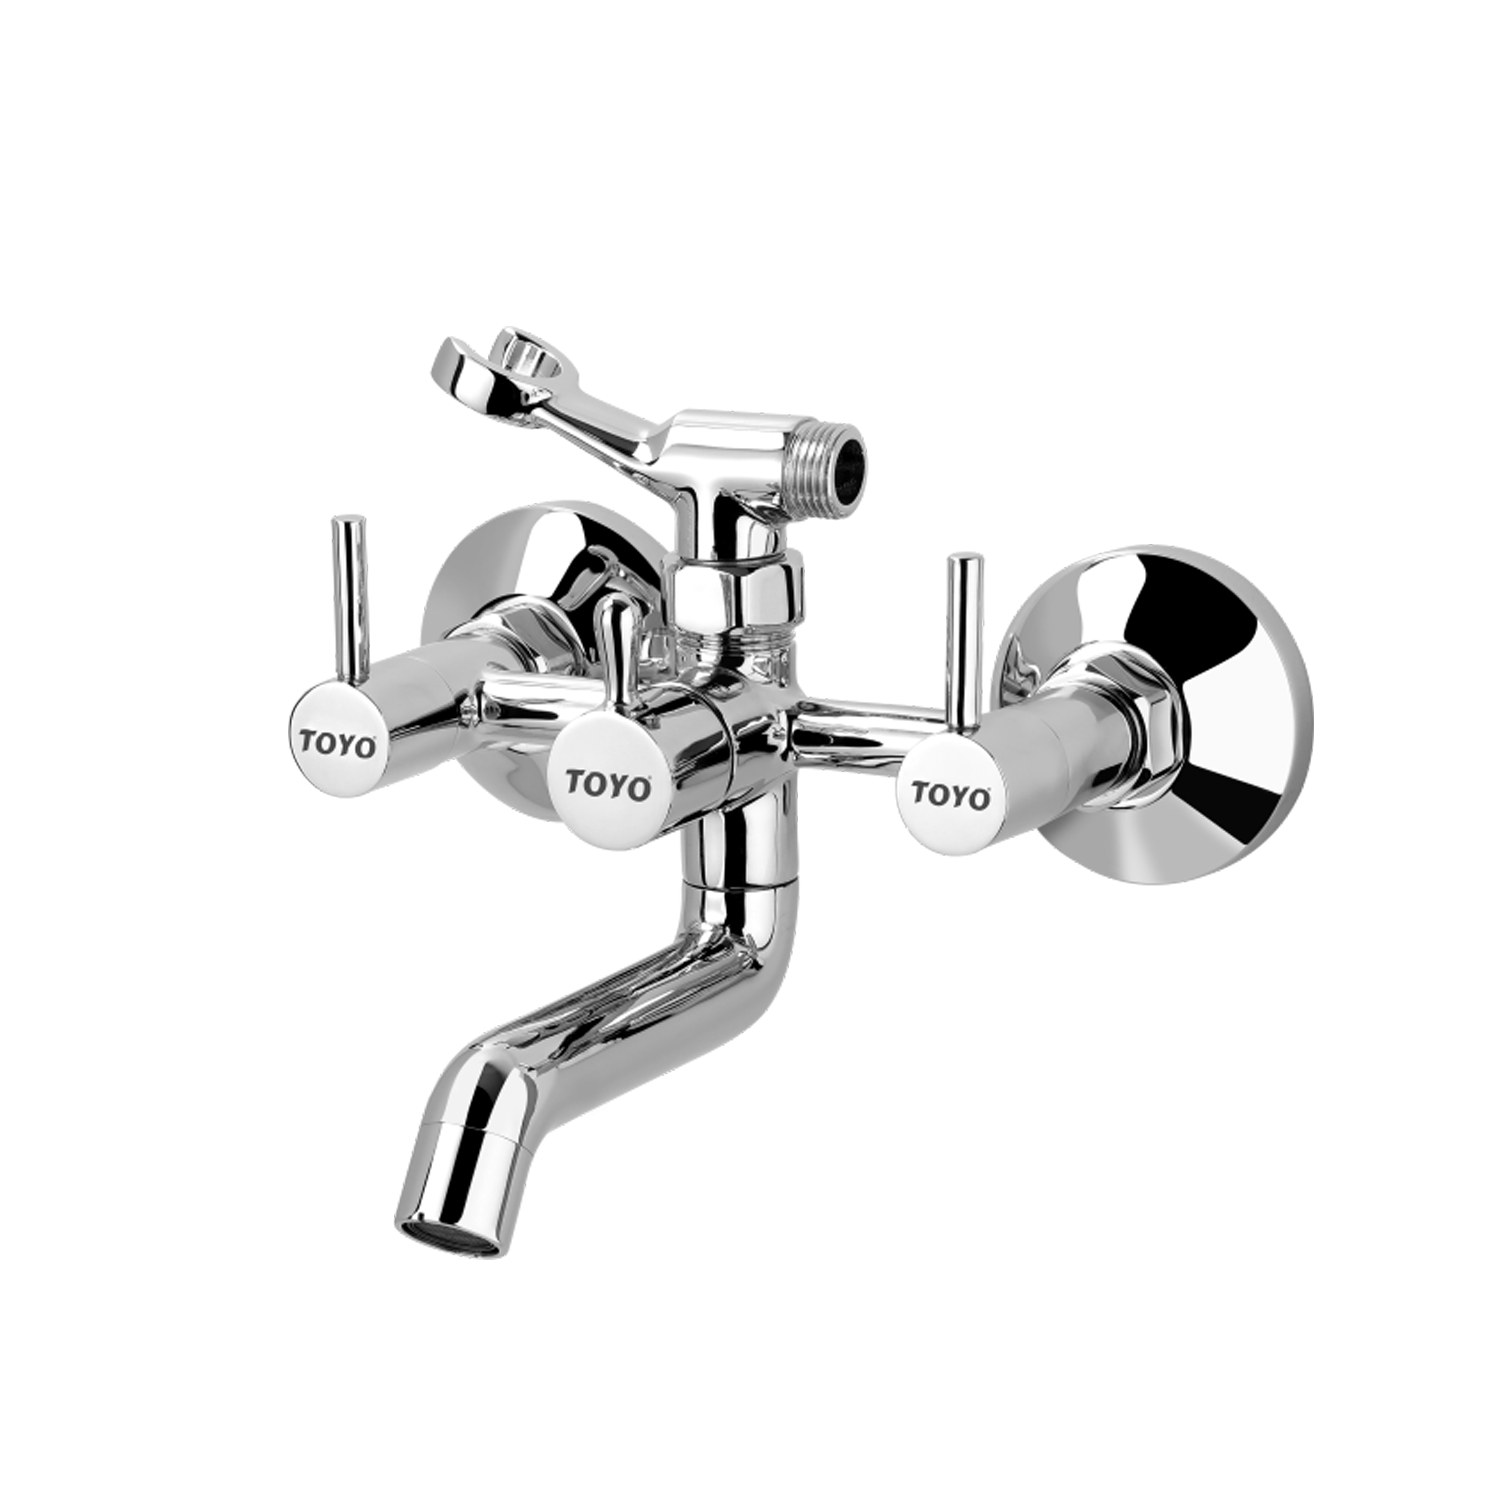 2 in 1 wall mixer